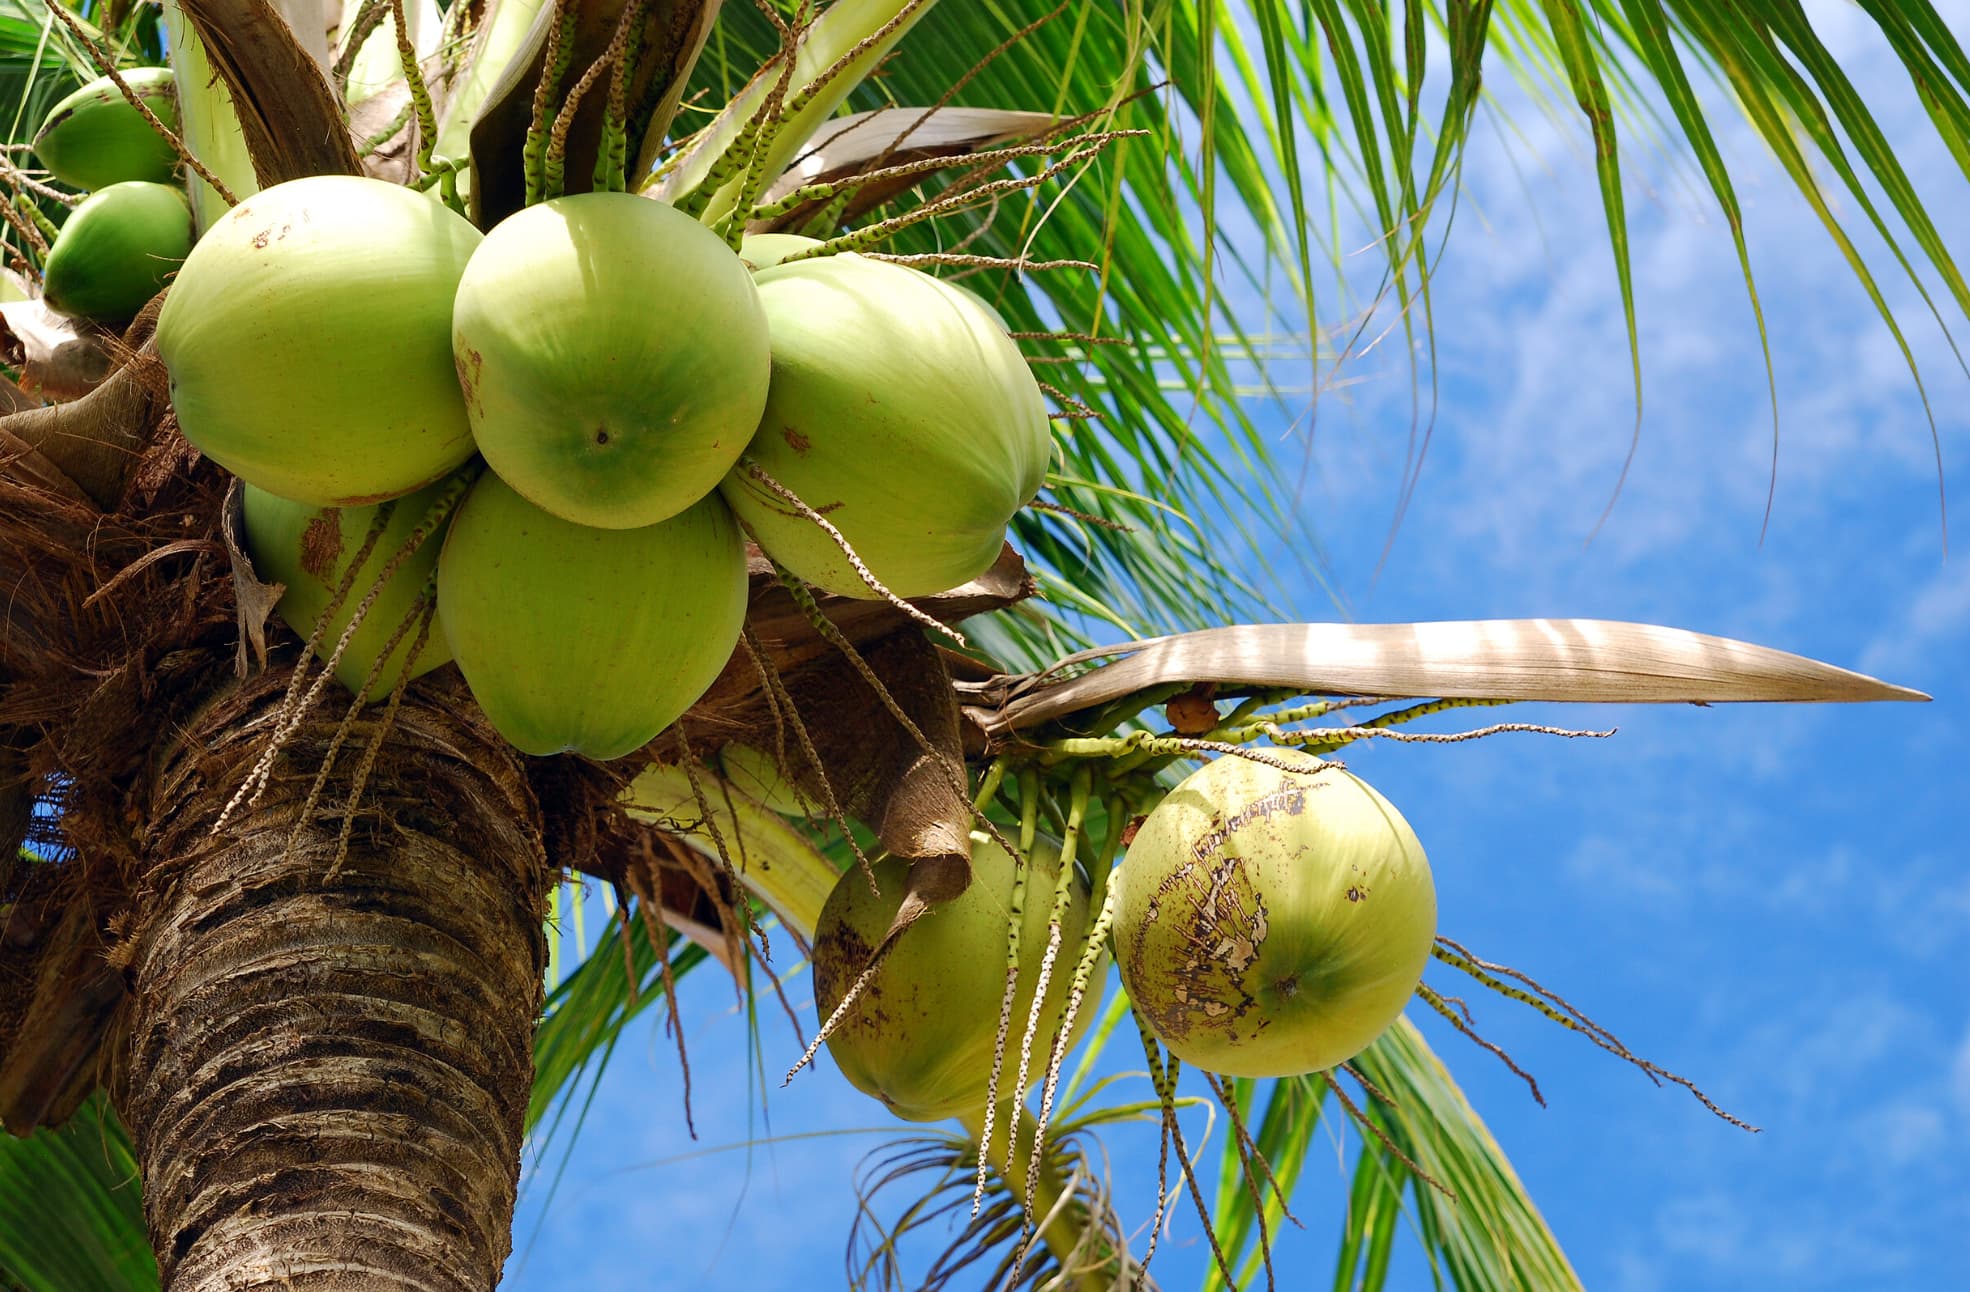 “Coconuts and coconut cultivation are so old, we don't know where on Earth they originated.”